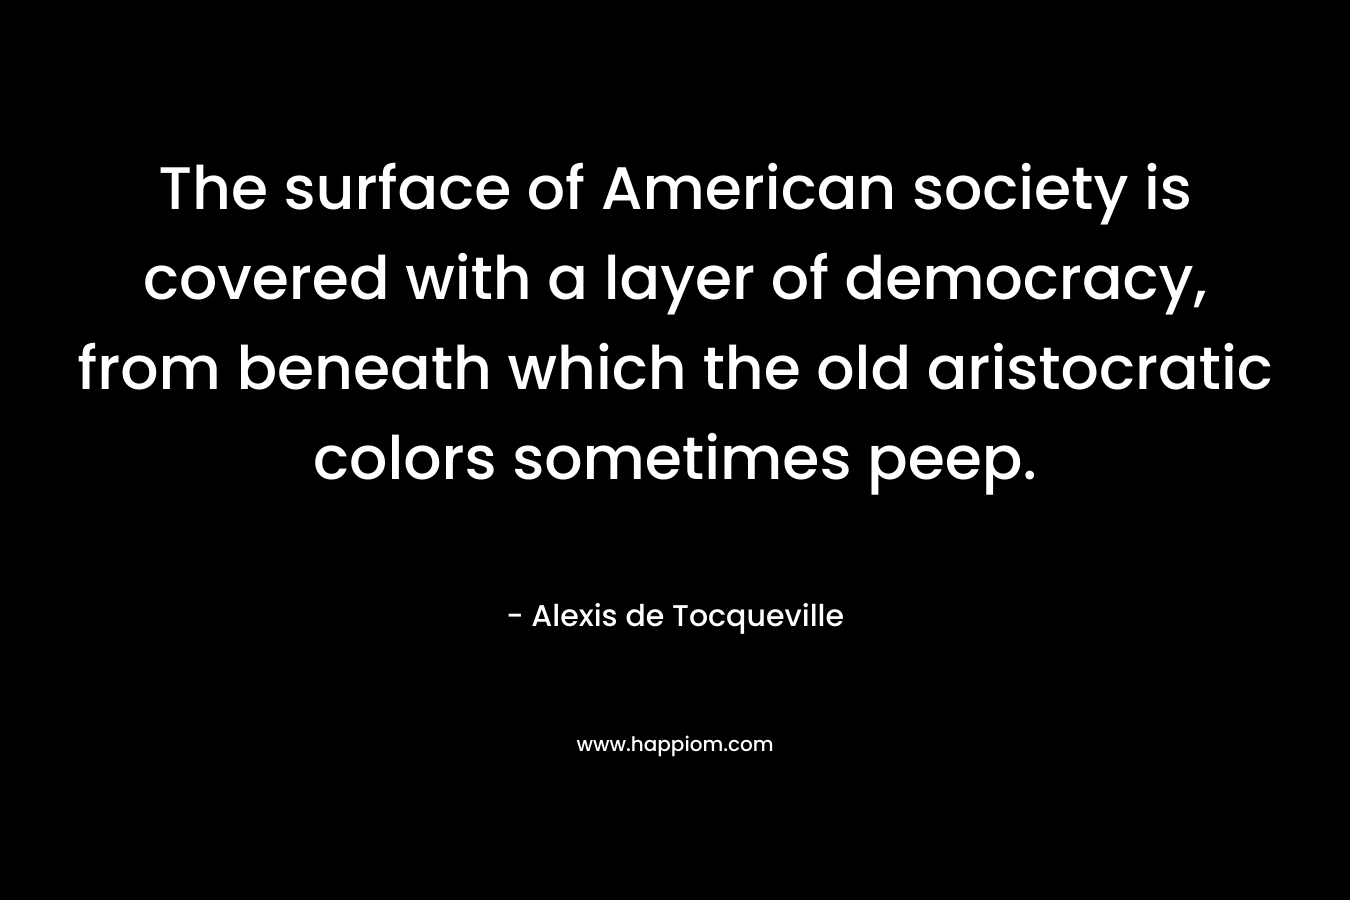 The surface of American society is covered with a layer of democracy, from beneath which the old aristocratic colors sometimes peep. – Alexis de Tocqueville